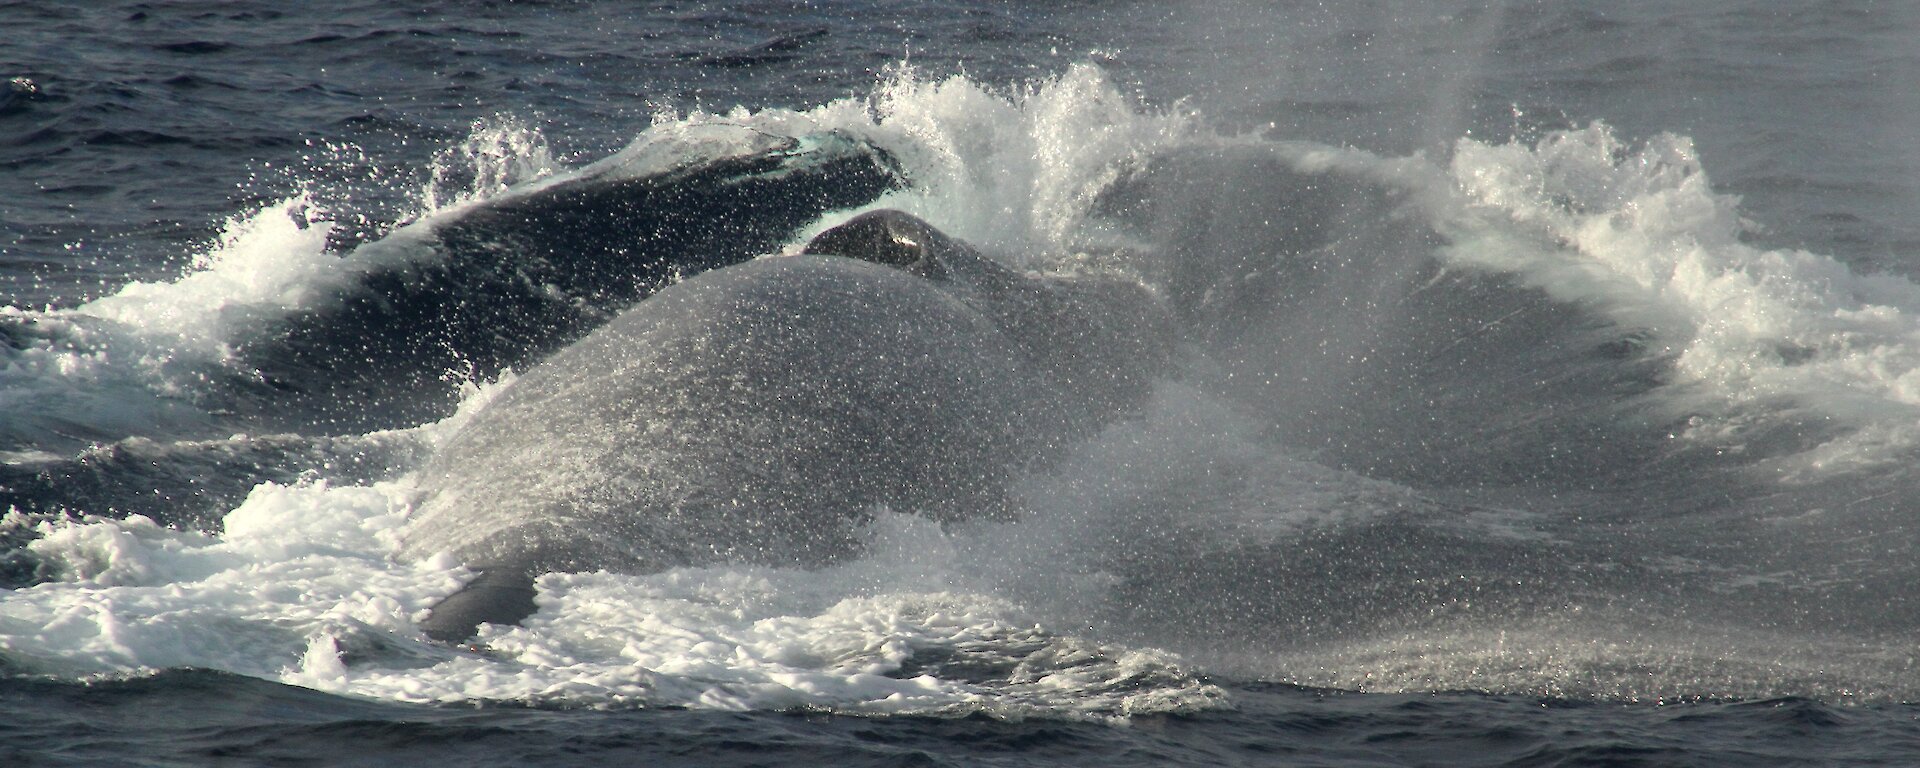 A blue whale in the Southern Ocean.